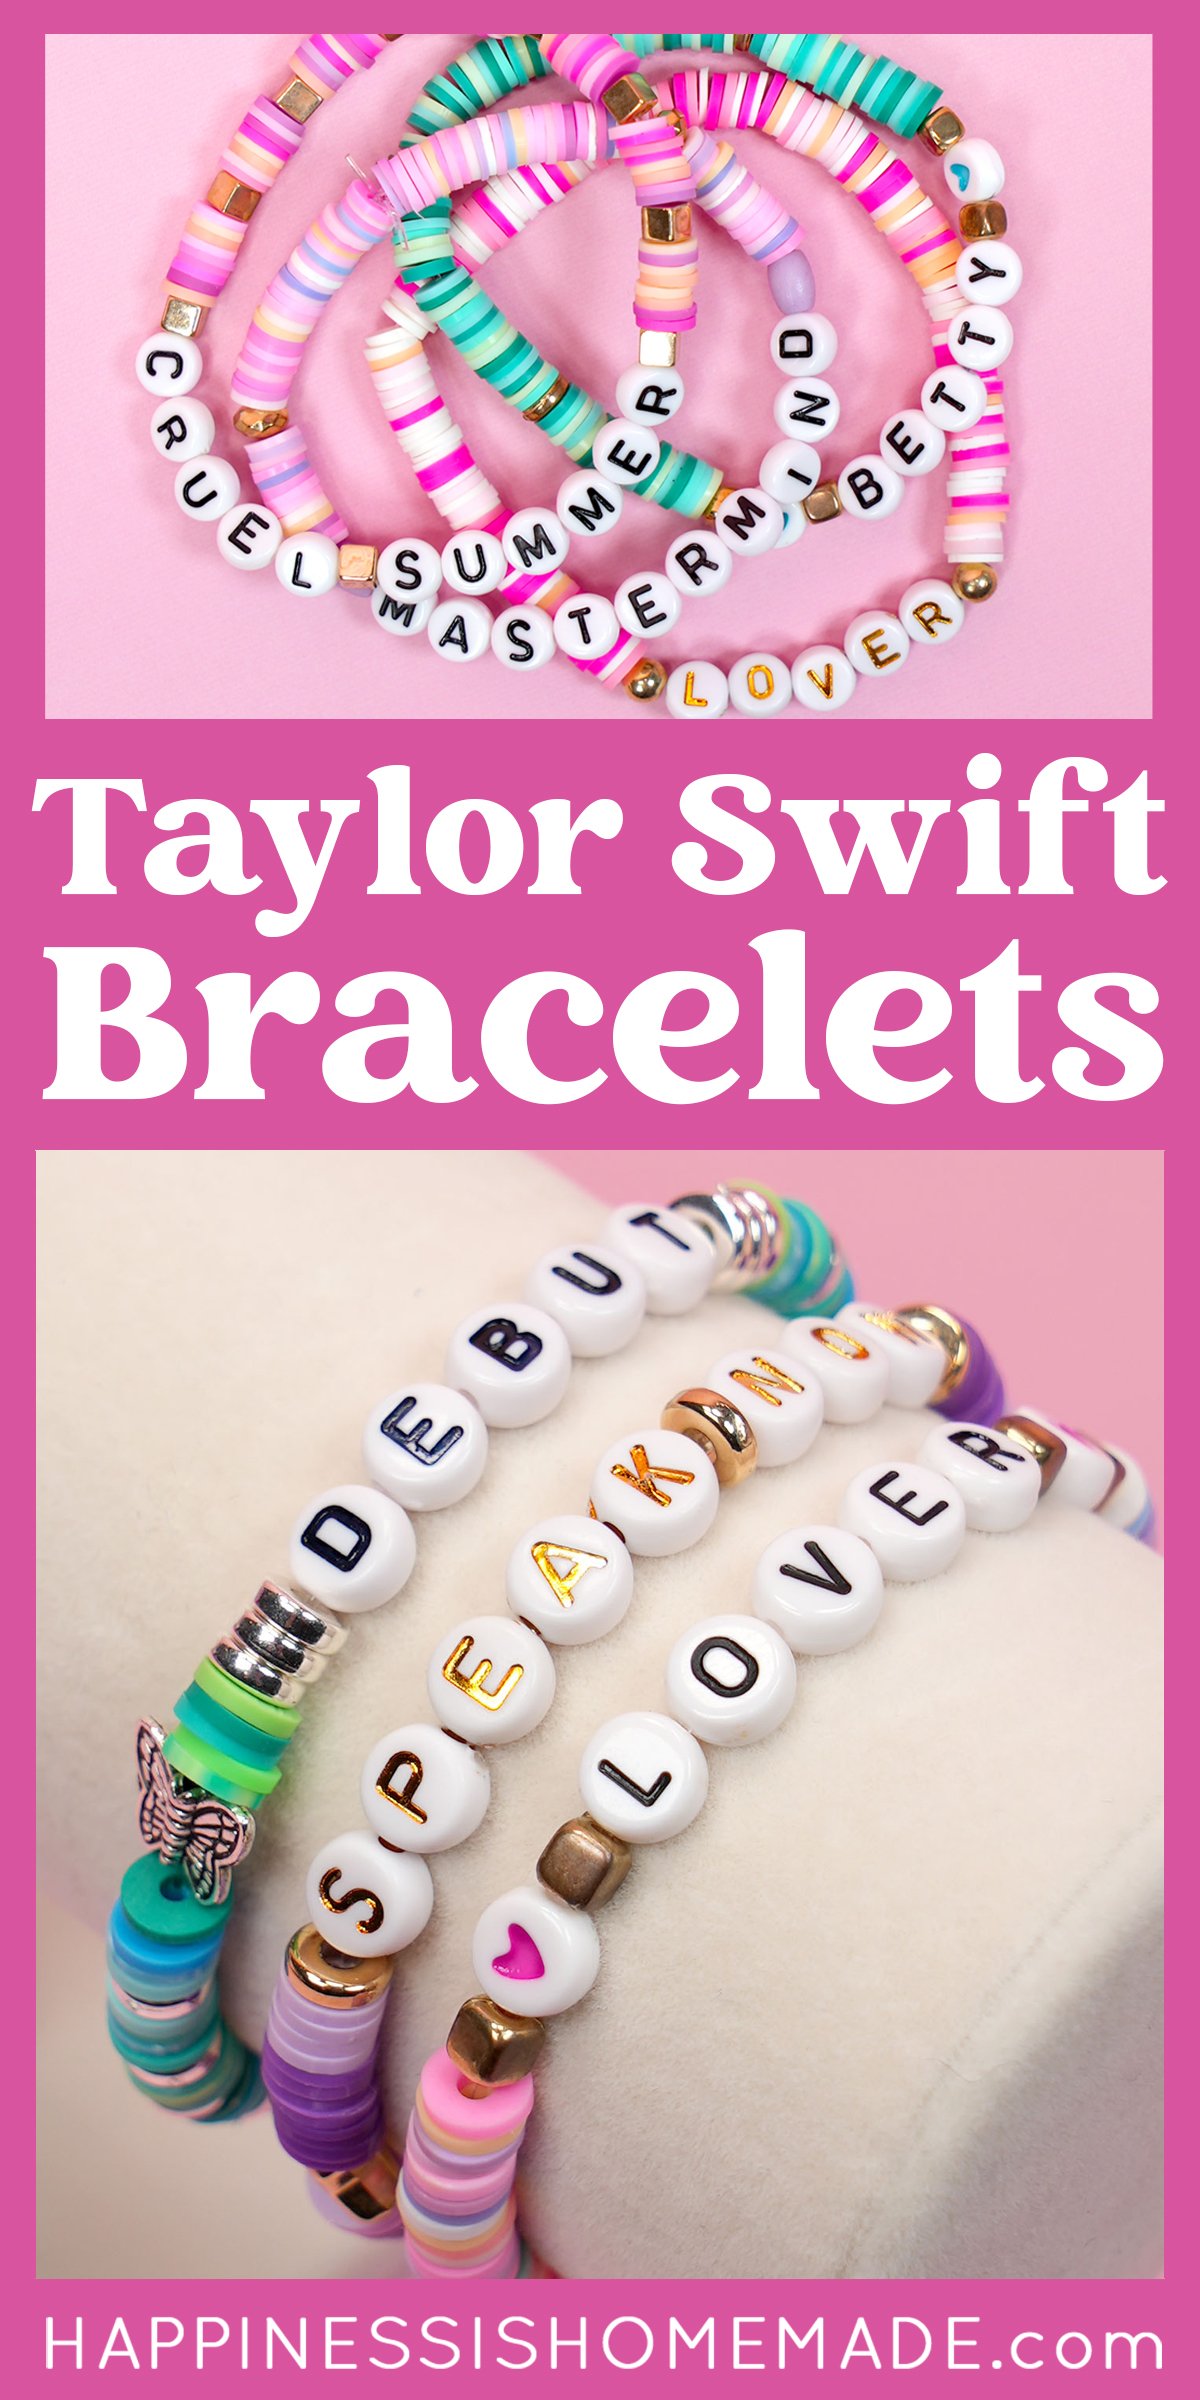 Pinterest graphic: "Taylor Swift Bracelets" with collage of friendship bracelet examples